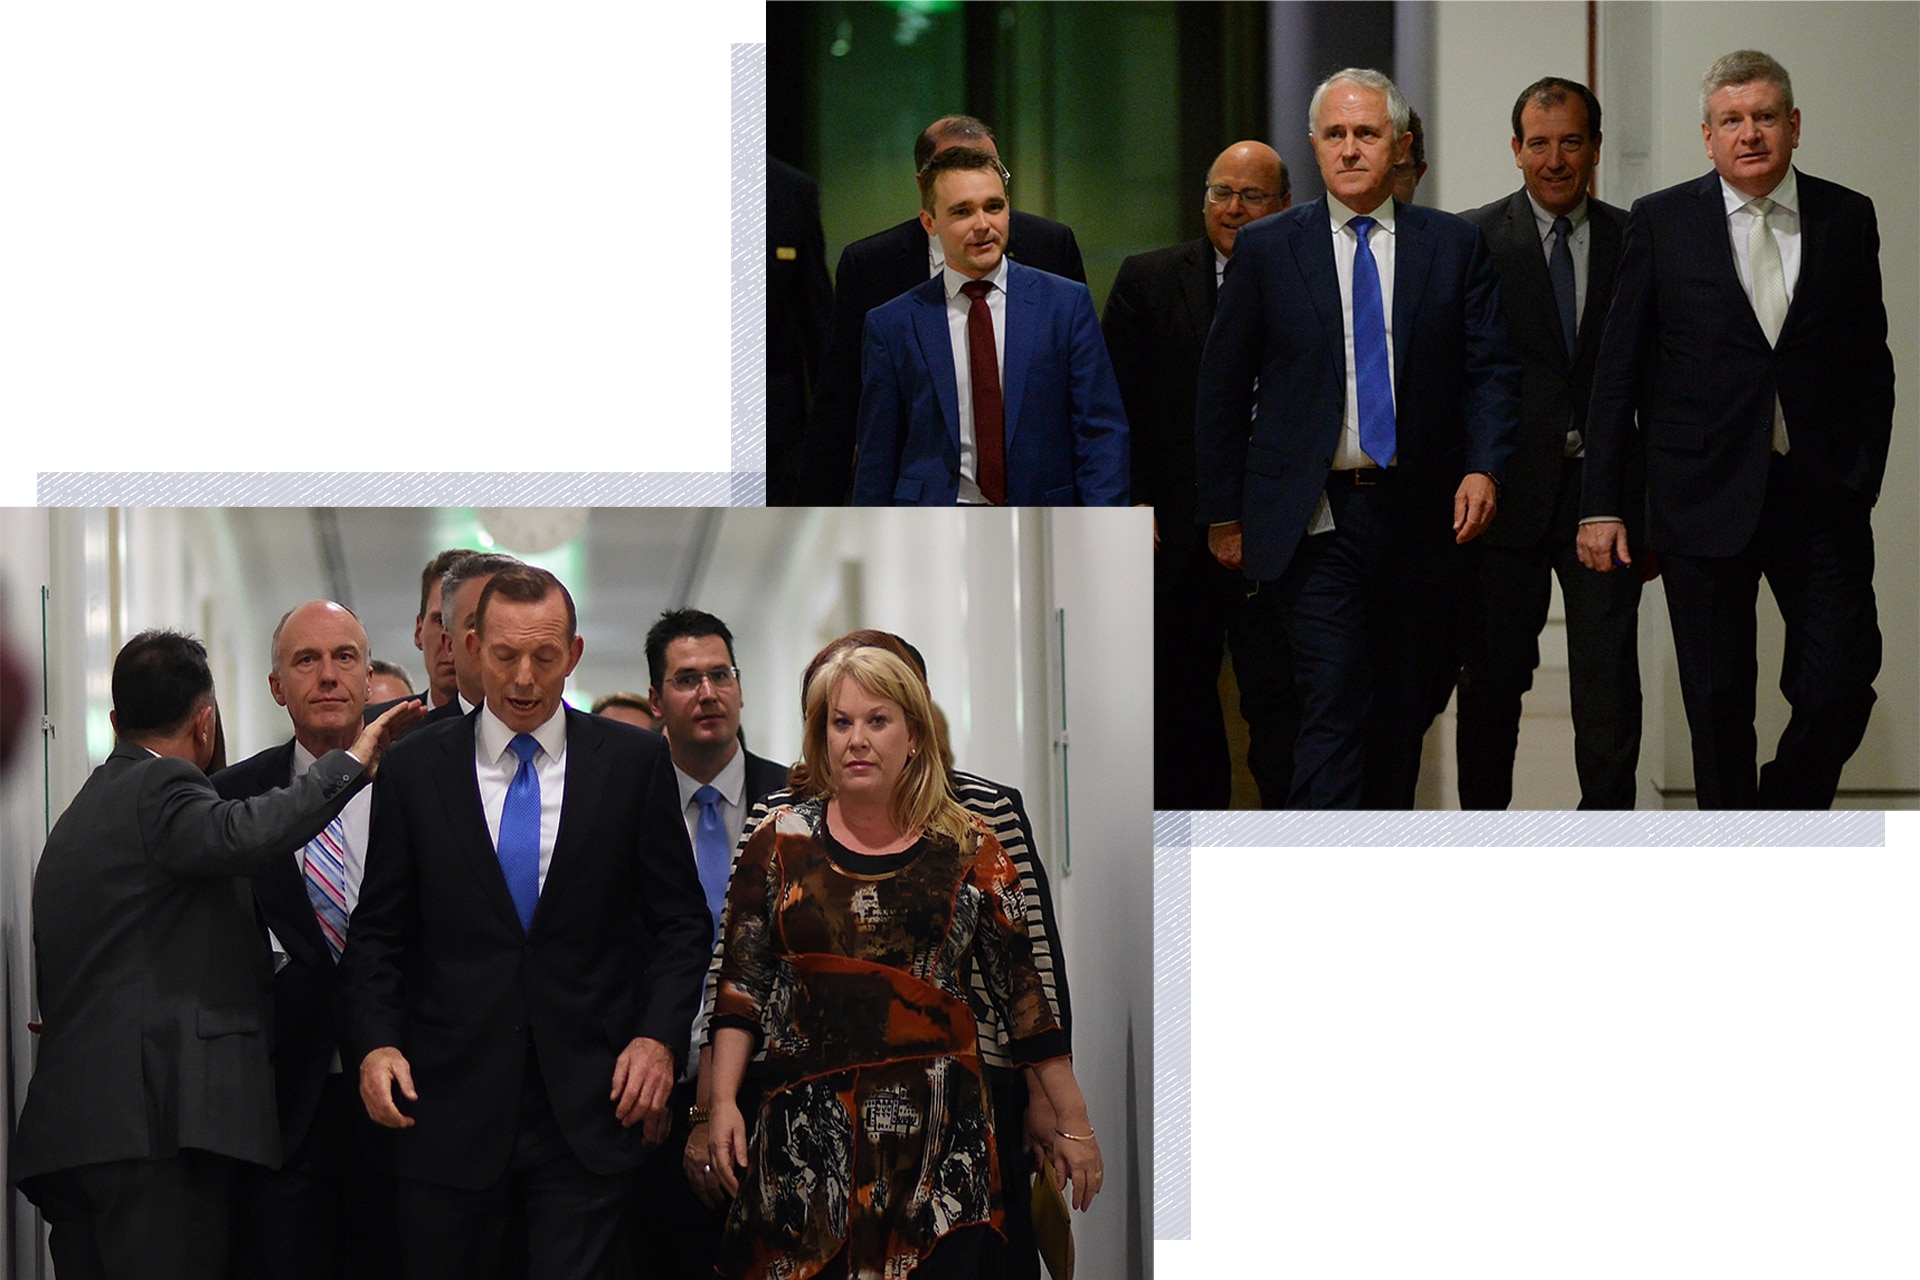 A collage of Tony Abbott and Malcolm Turnbull.